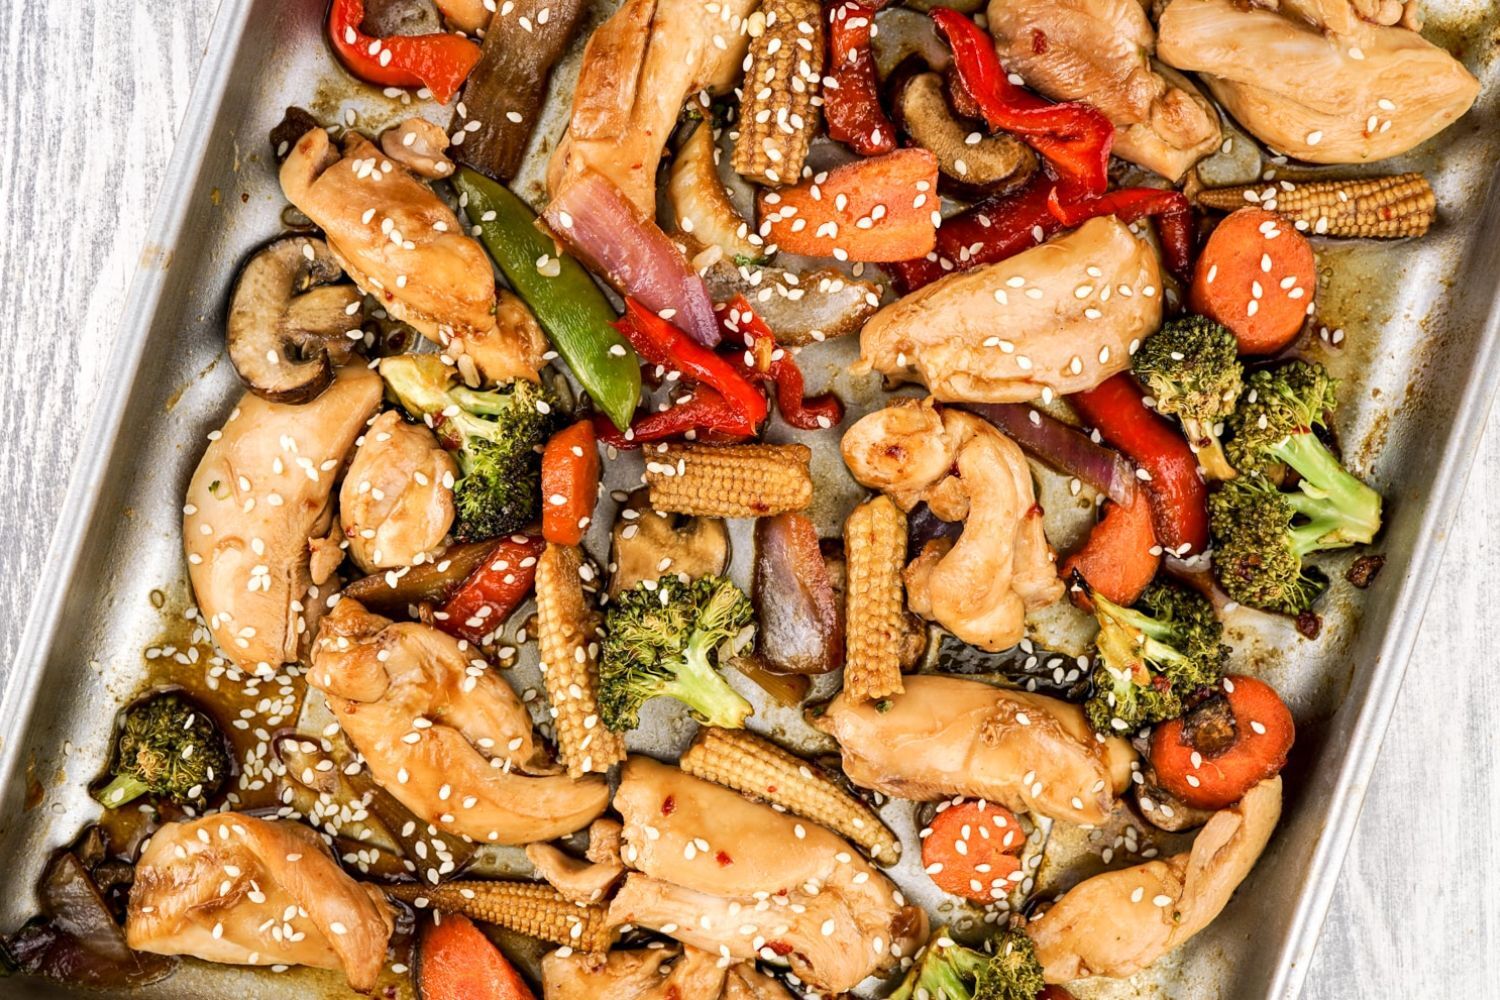 Easiest Ever Chicken Stir Fry - Family Food on the Table